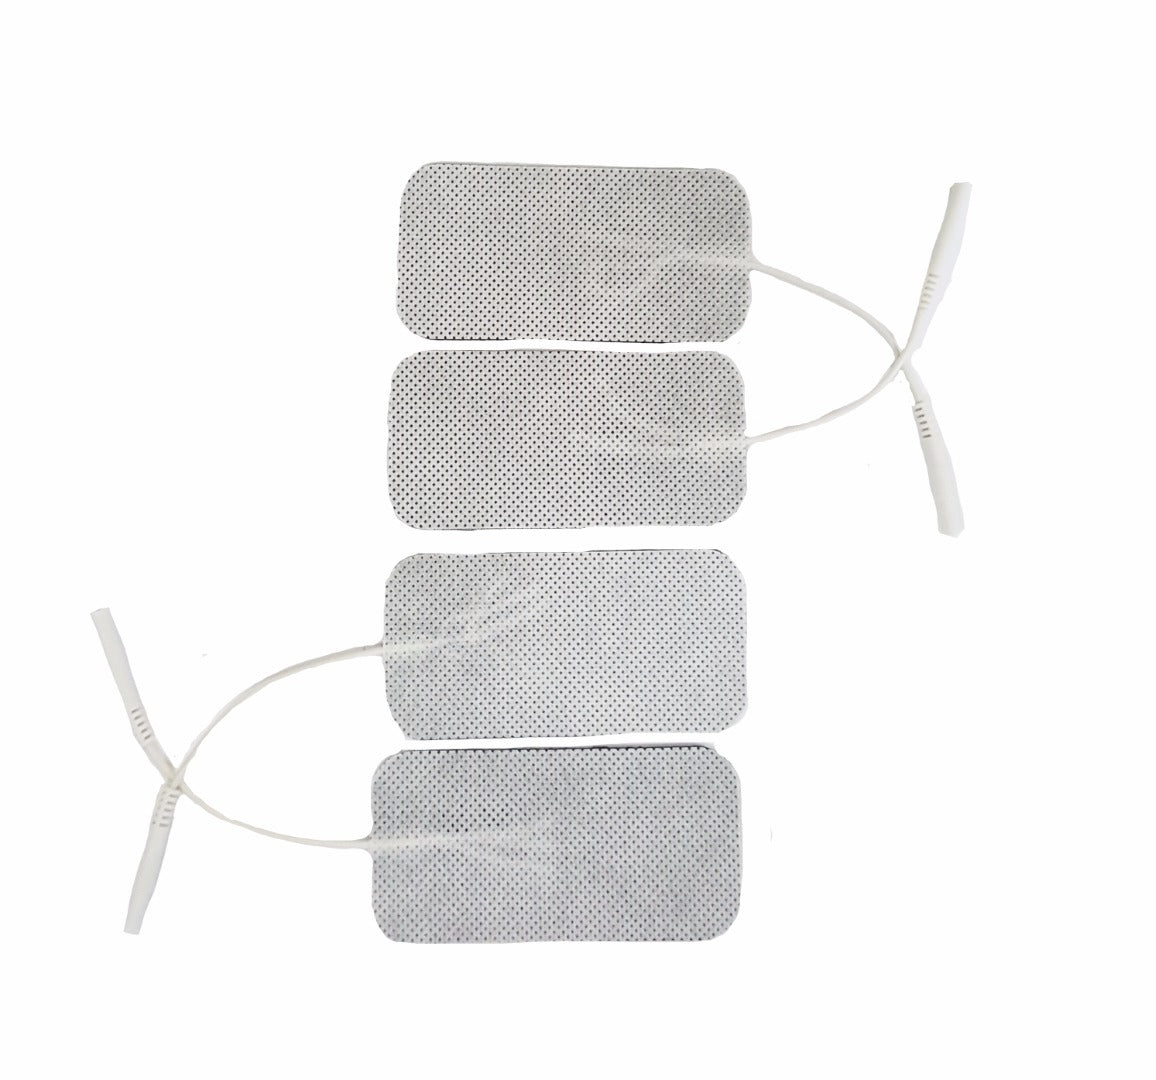 Electrodes For Obstetric TENS Machine